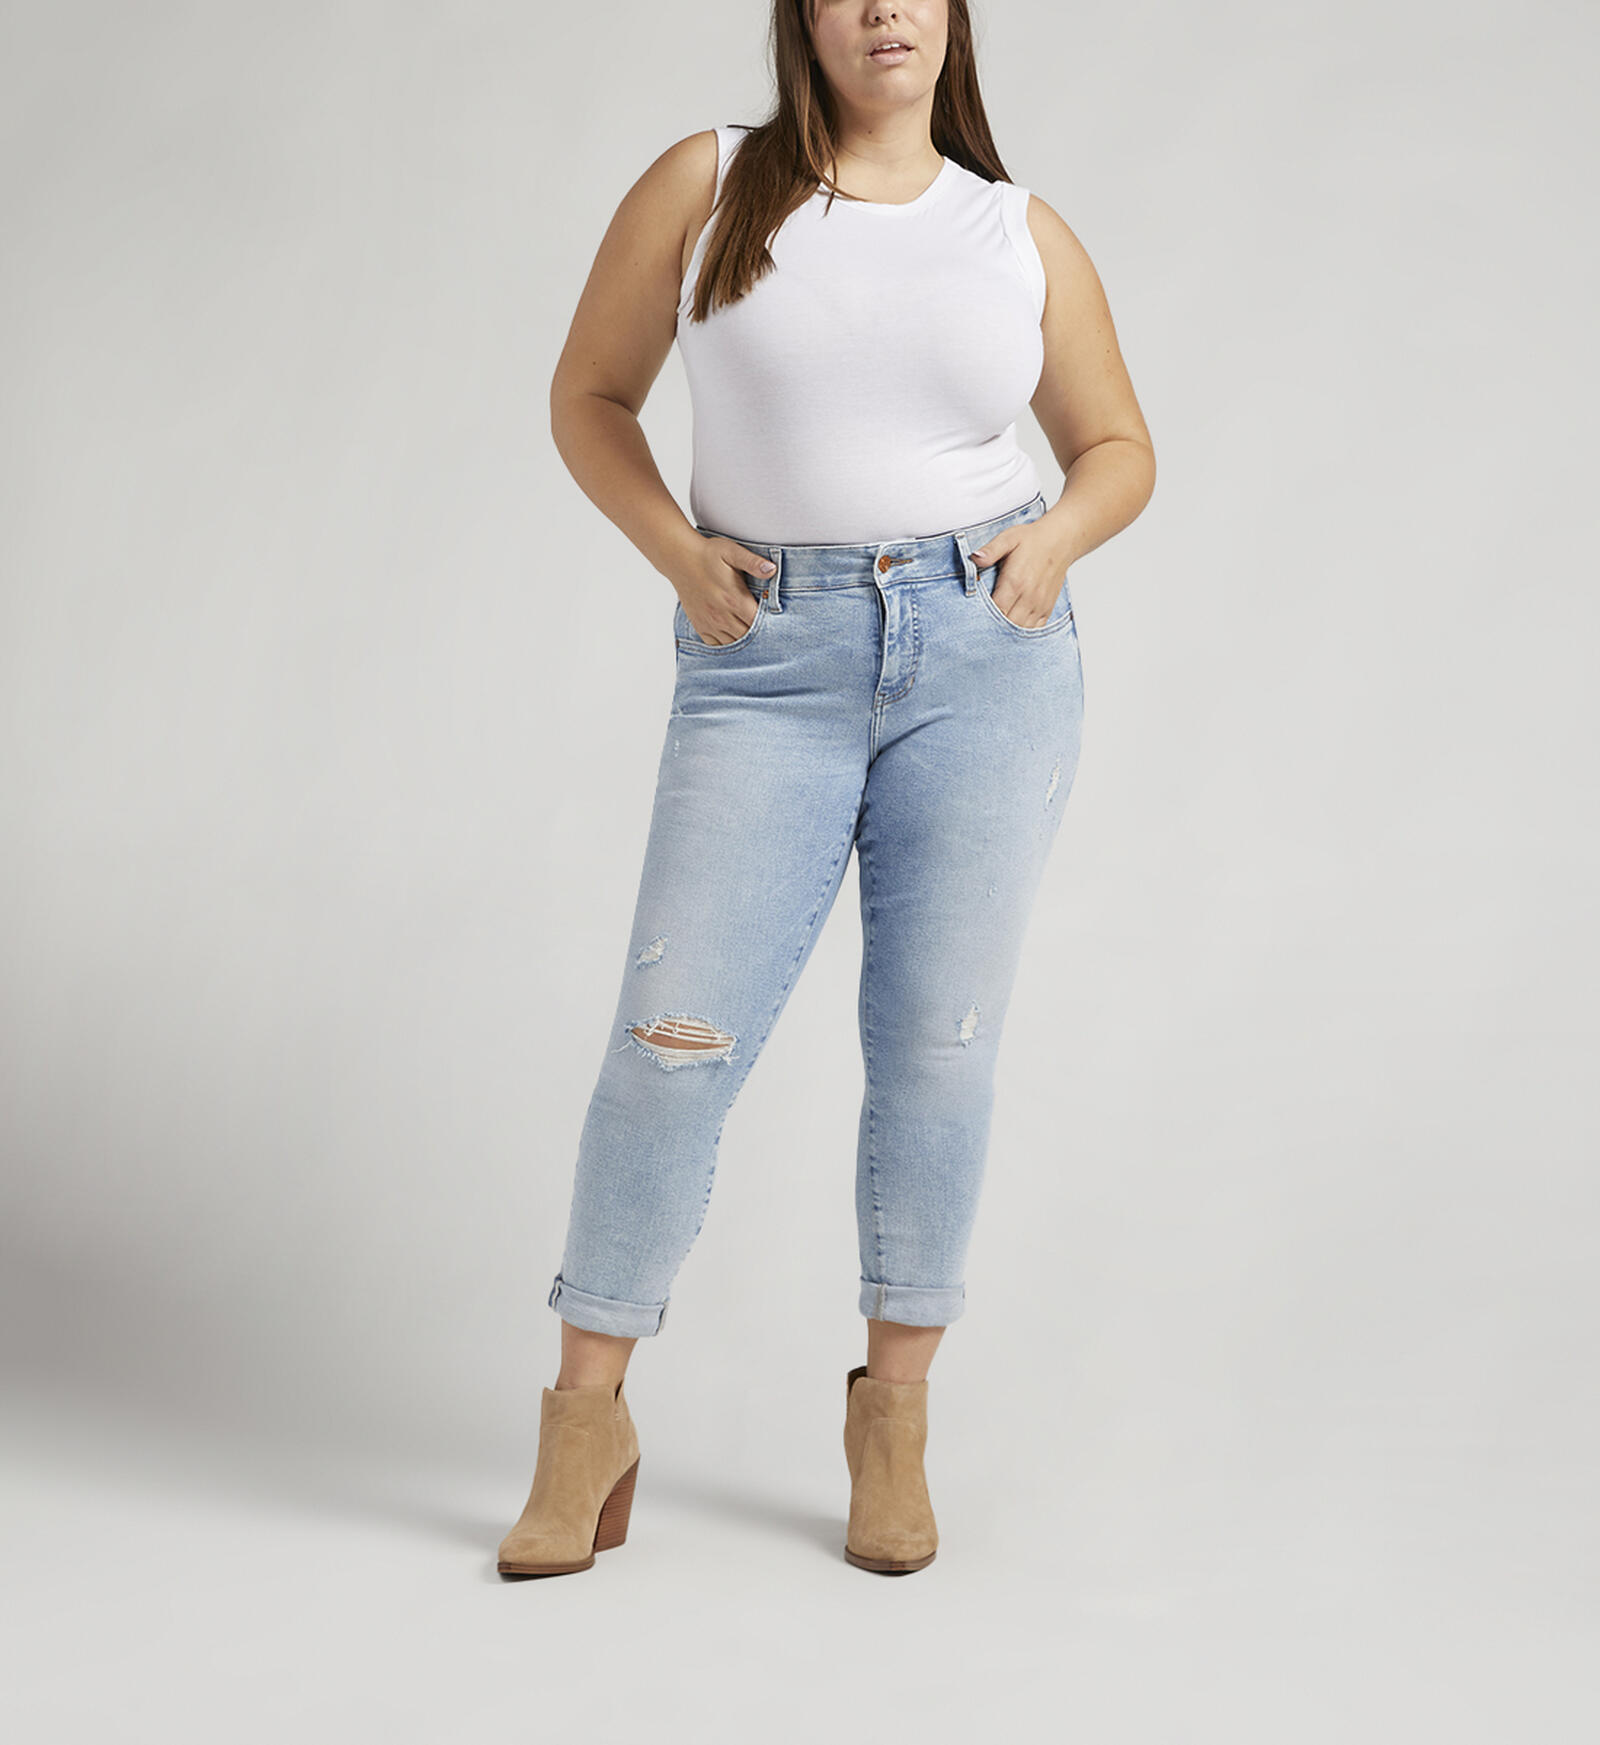 Buy Carter Mid Rise Girlfriend Jeans Plus Size for USD 88.00